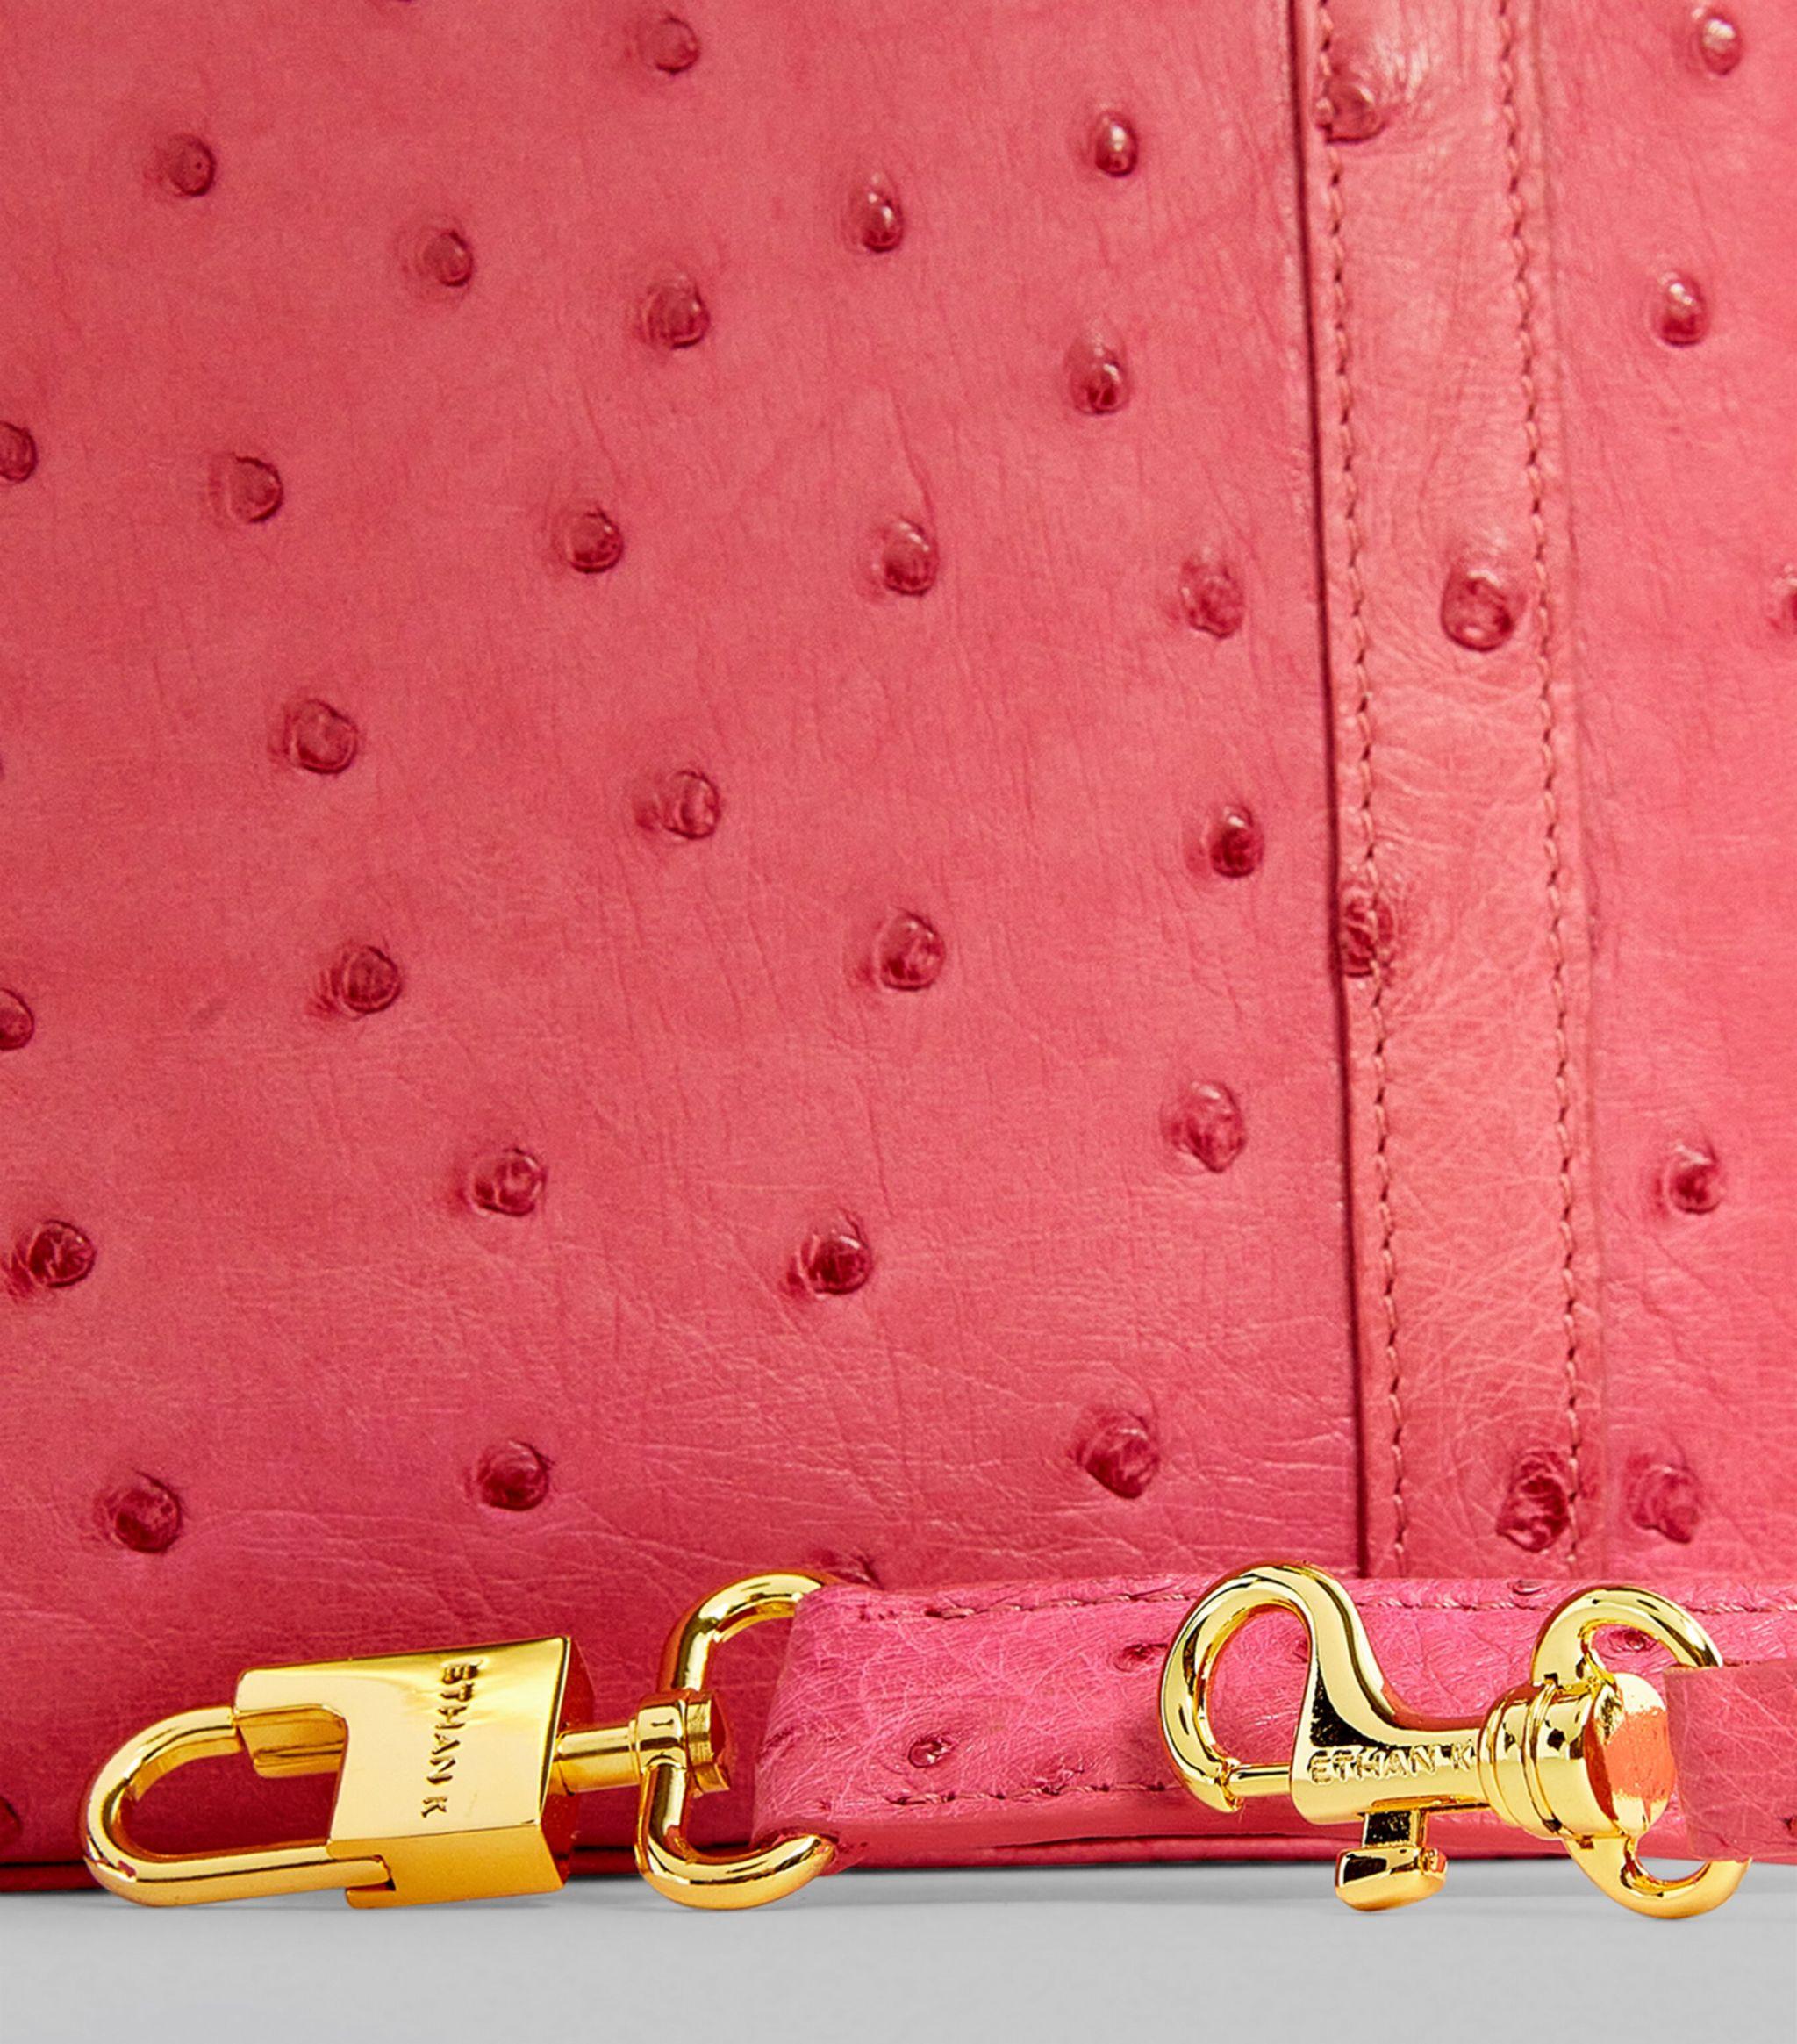 Ethan K Ostrich Leather Mini Briefcase Top-handle Bag in Pink